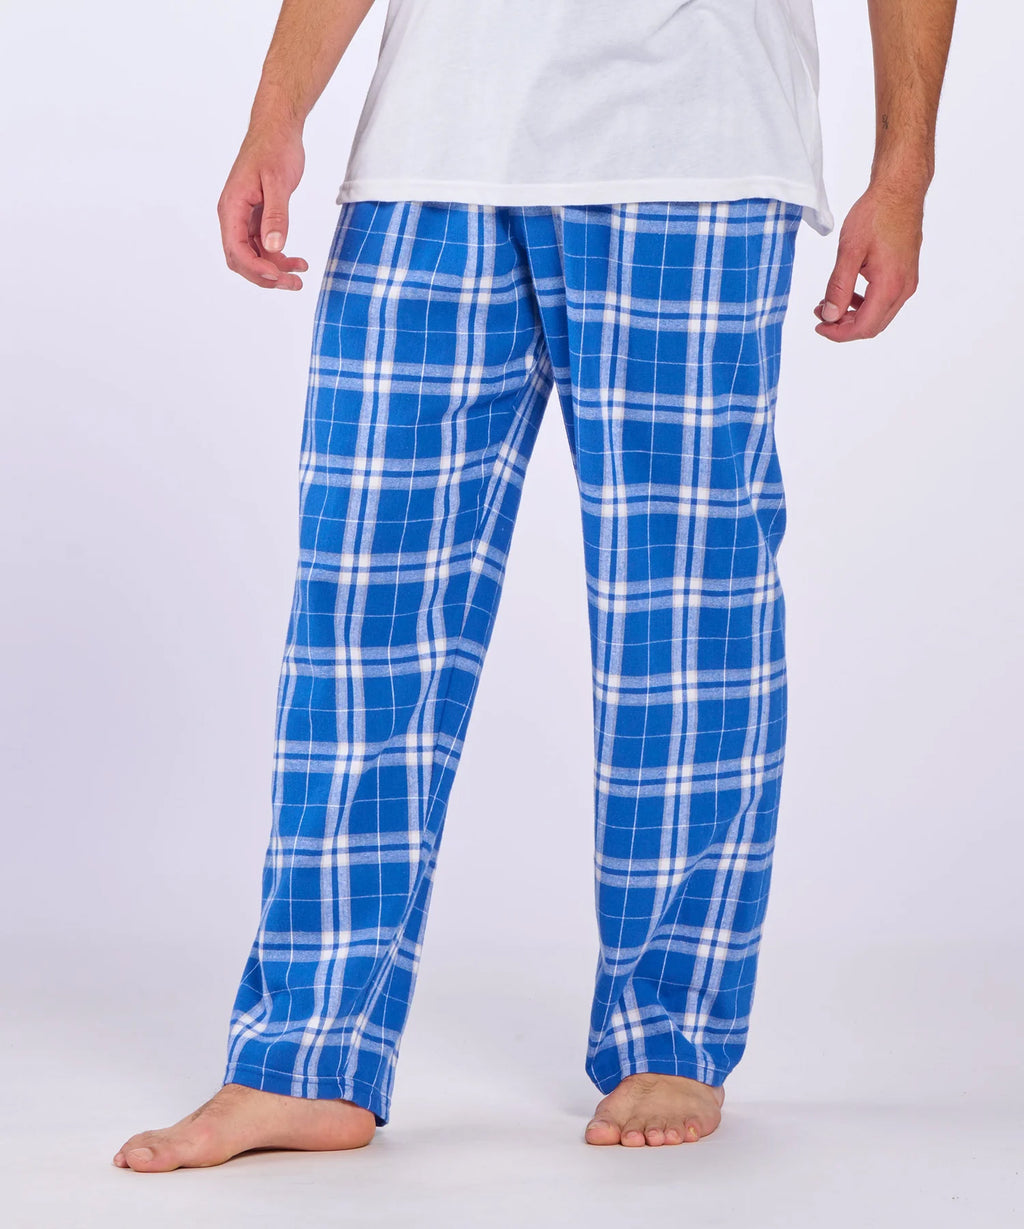 Christopher Newport University Flannel  Pj Set.  Royal blue long sleeve tshirt printed with the CNU Captain logo in white.  Comes with royal and white flannel pants.